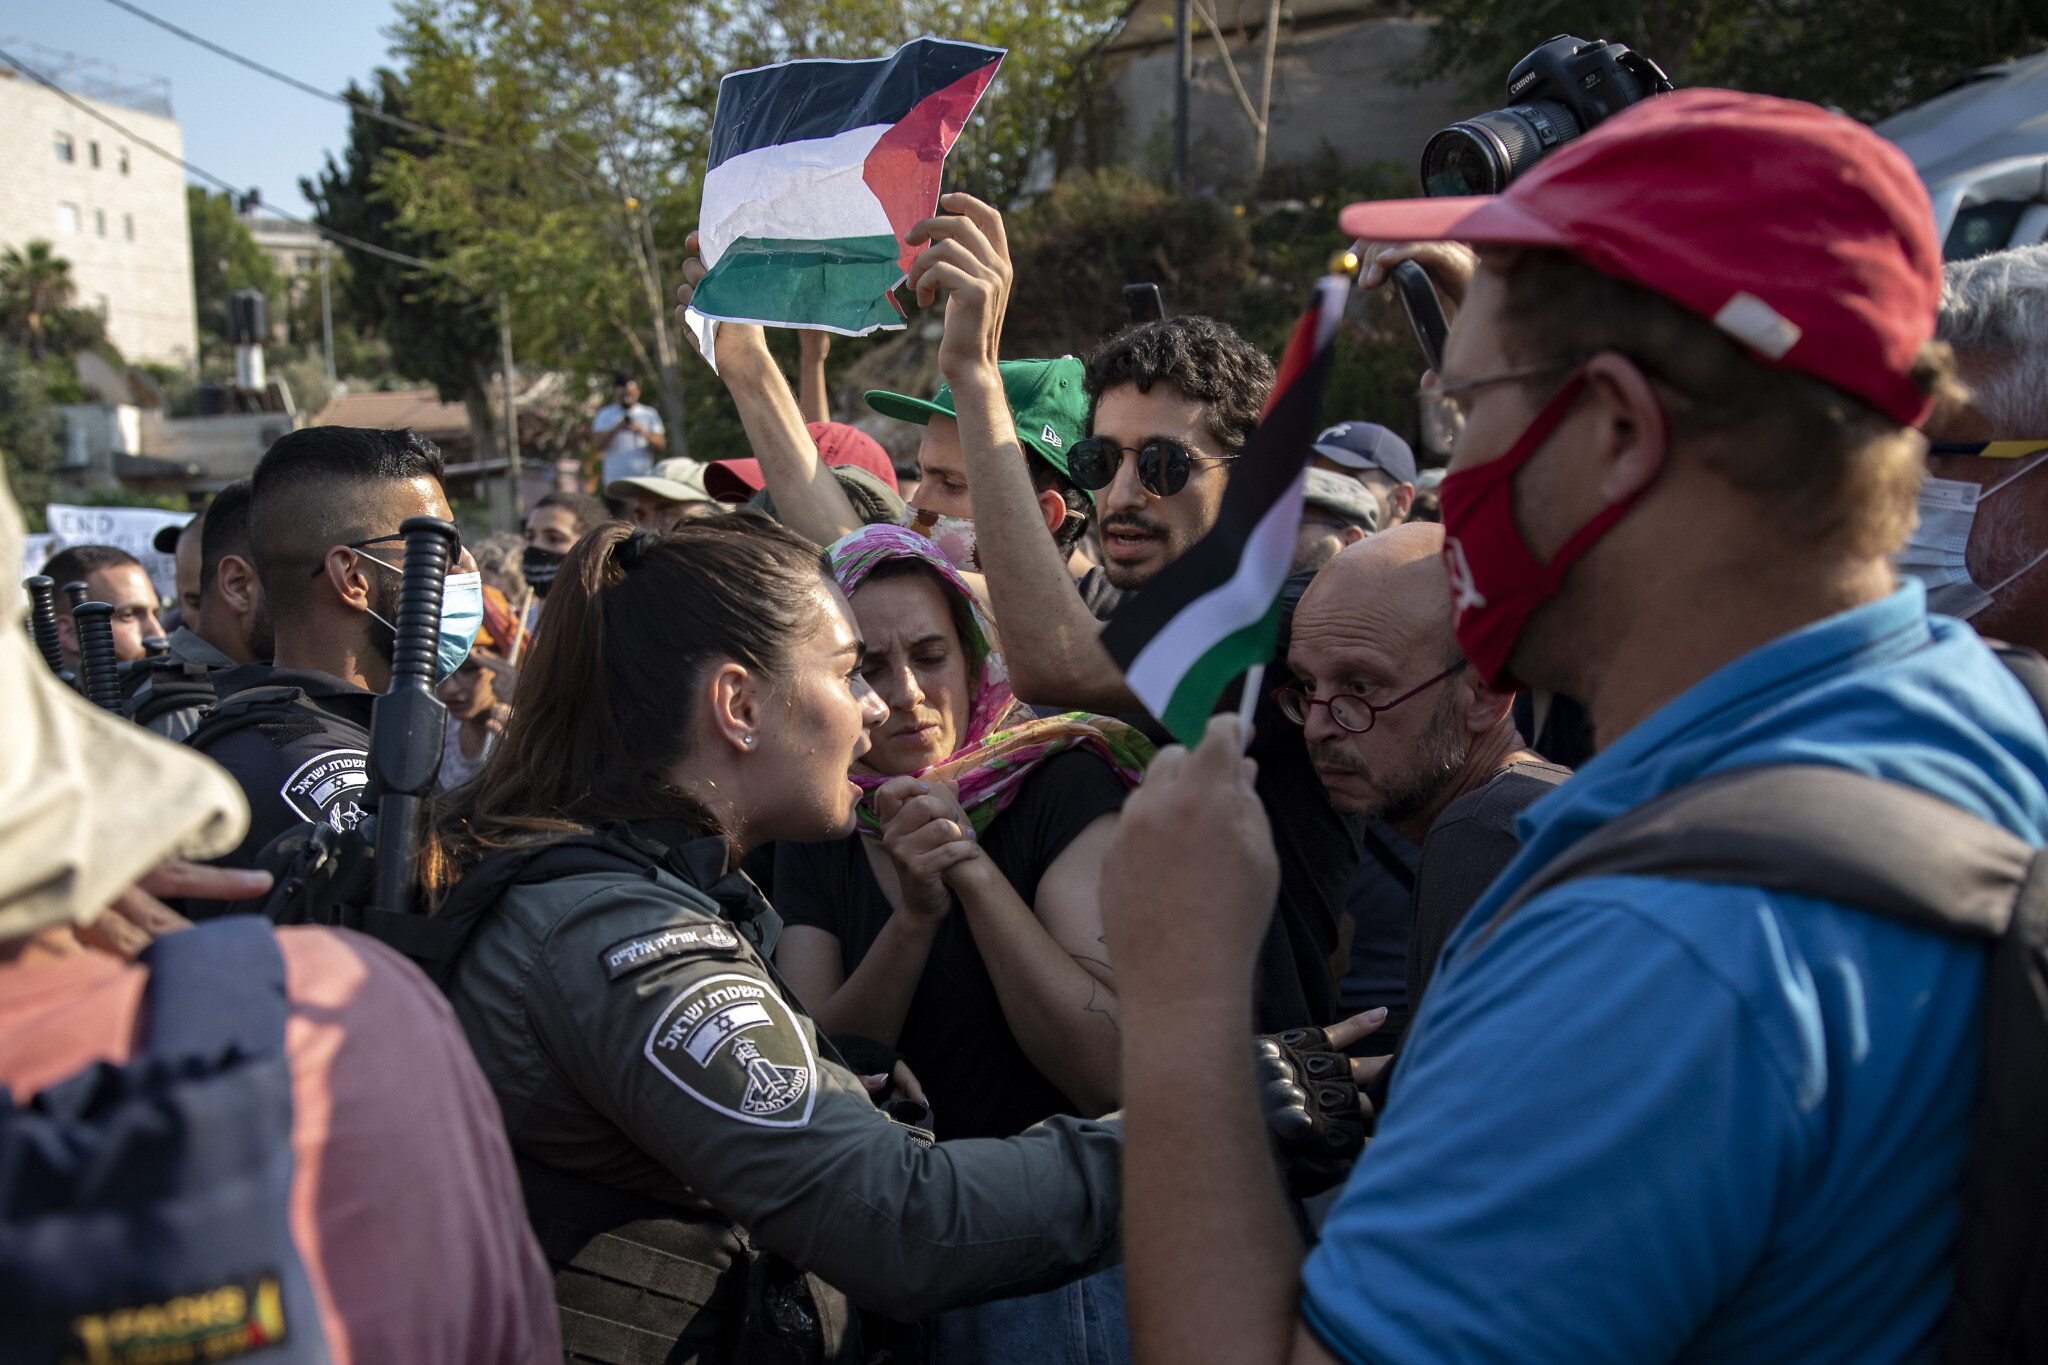 Protesters demonstrate in the East Jerusalem neighborhood of Sheikh Jarrah on July 30, 2021. (Olivier Fitoussi/Flash90)